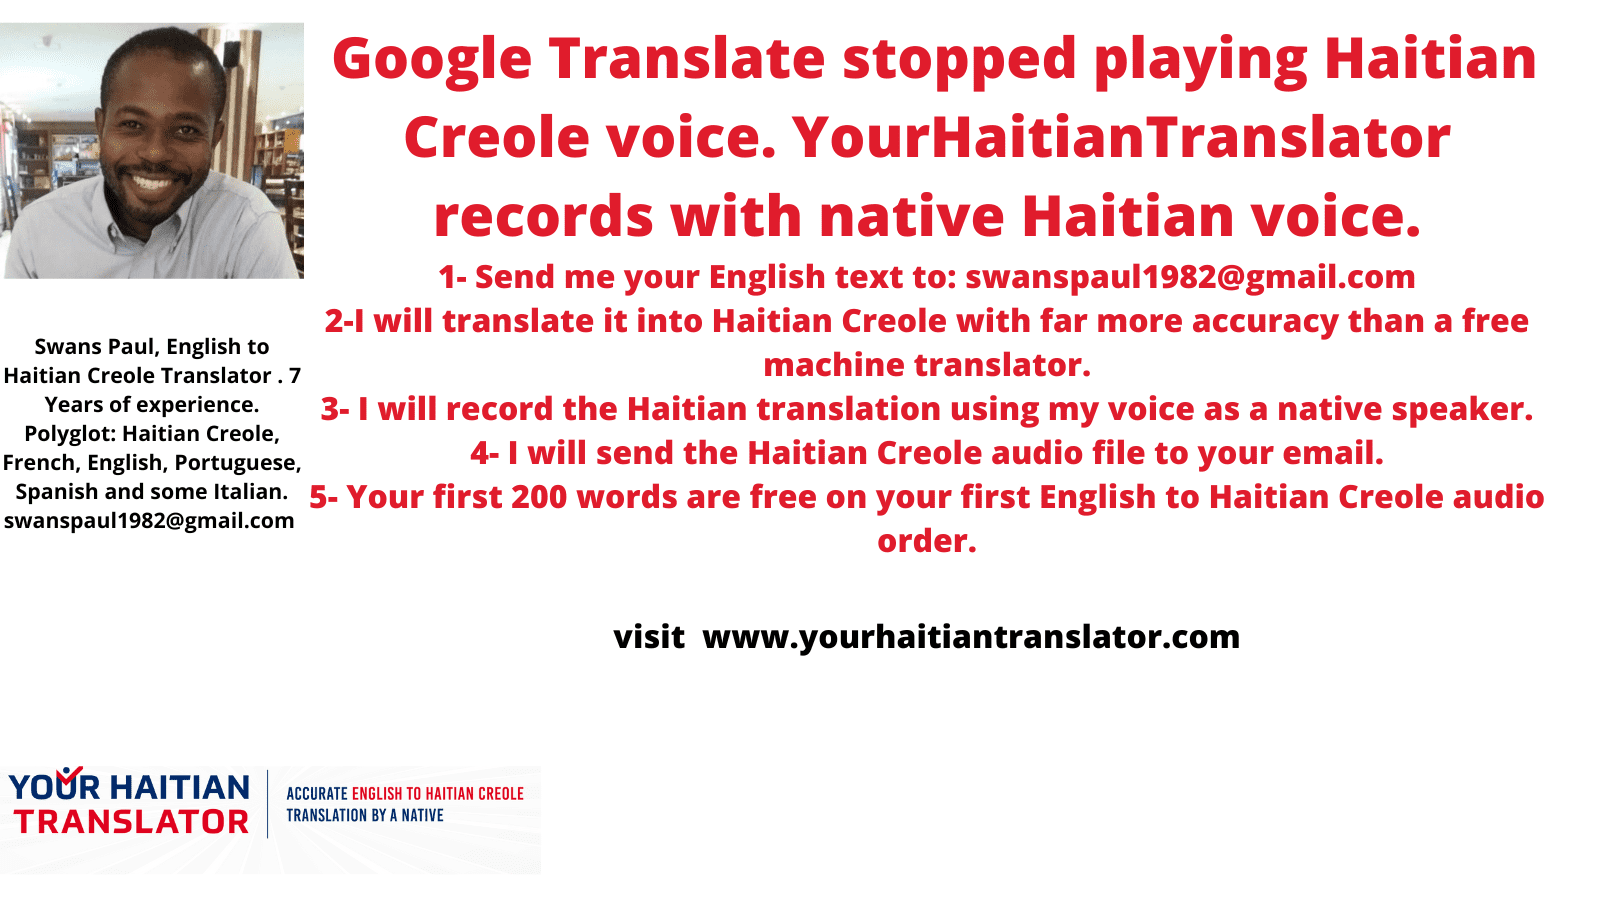 Google Translate English to Haitian Creole voice has been stopped. But YourHaitianTranslator will record with human voice.